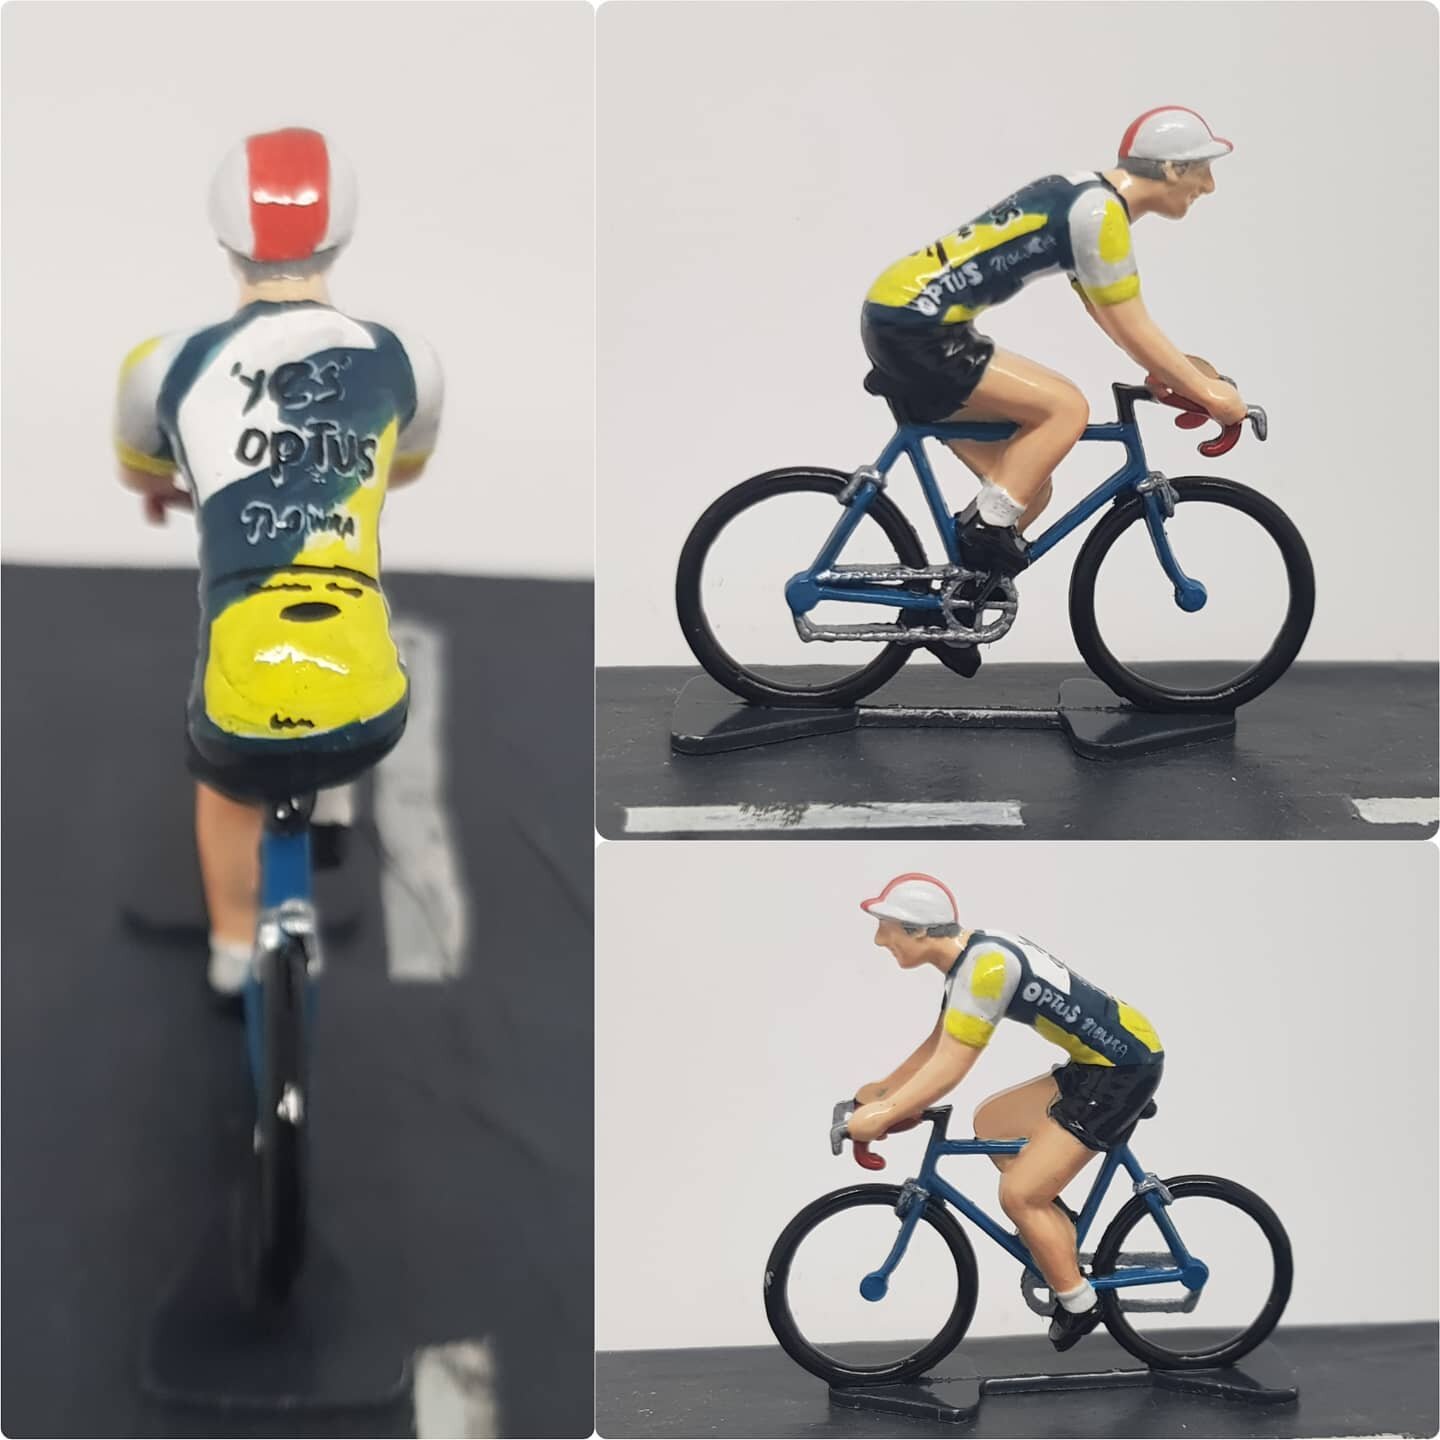 This striking cyclist is on its way down under ✌️ Custom painted for a great birthday gift.  Head over to ModelCyclist.com to order yours! 🙌 #cycling #mini #cyclist #tourdefrance #tourdefrance2020 #painting #handpainted #design #miniature #jersey #s